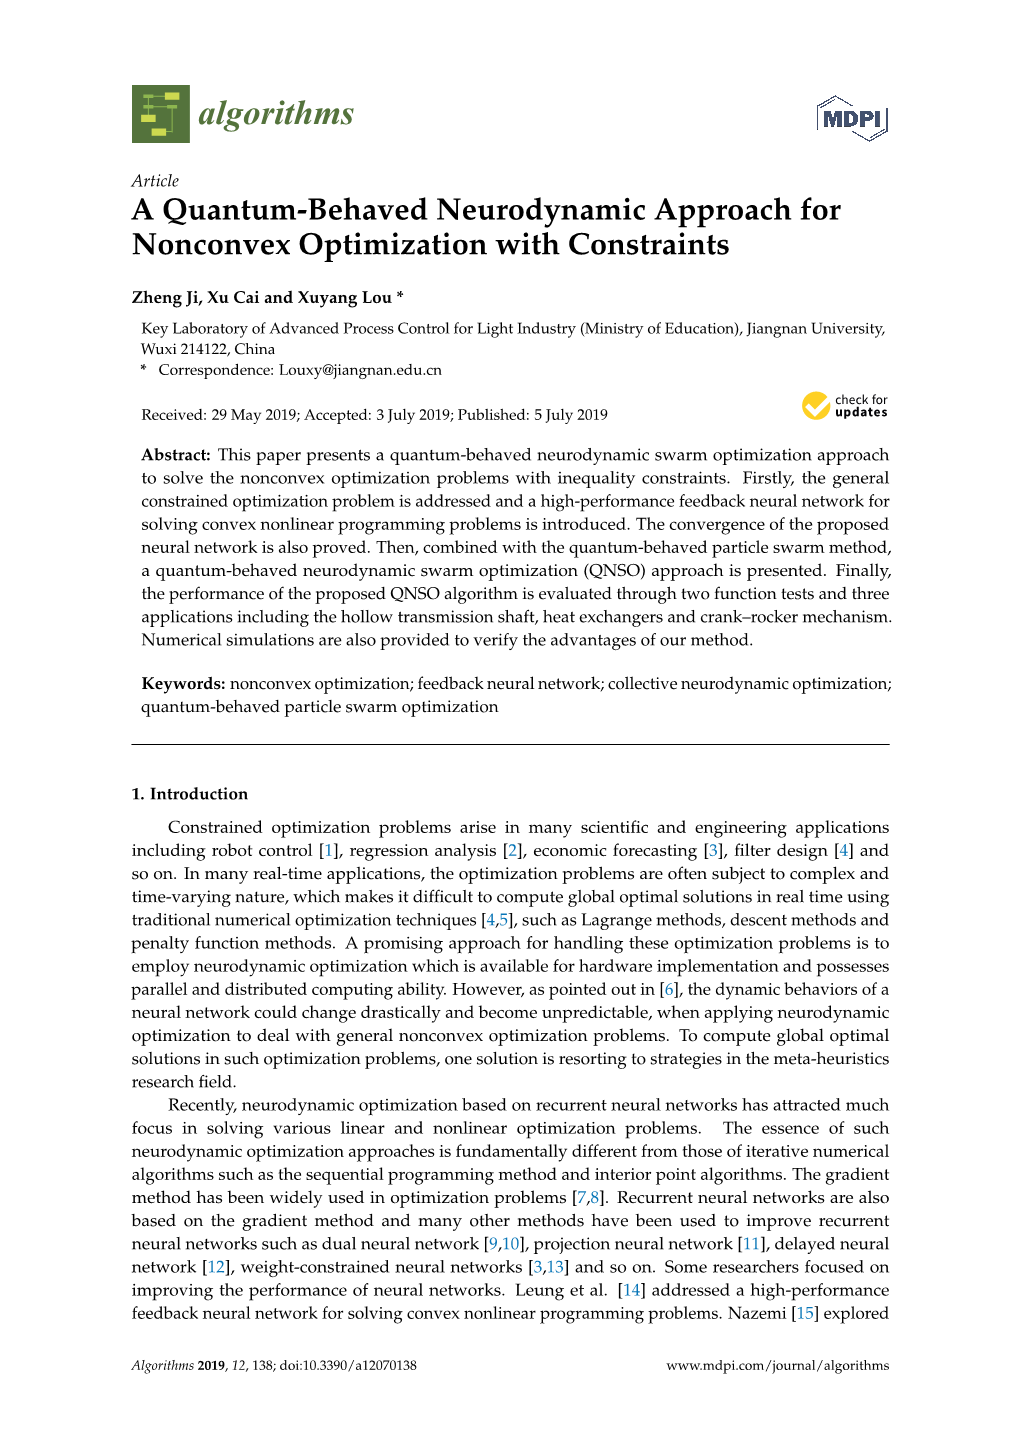 A Quantum-Behaved Neurodynamic Approach for Nonconvex Optimization with Constraints